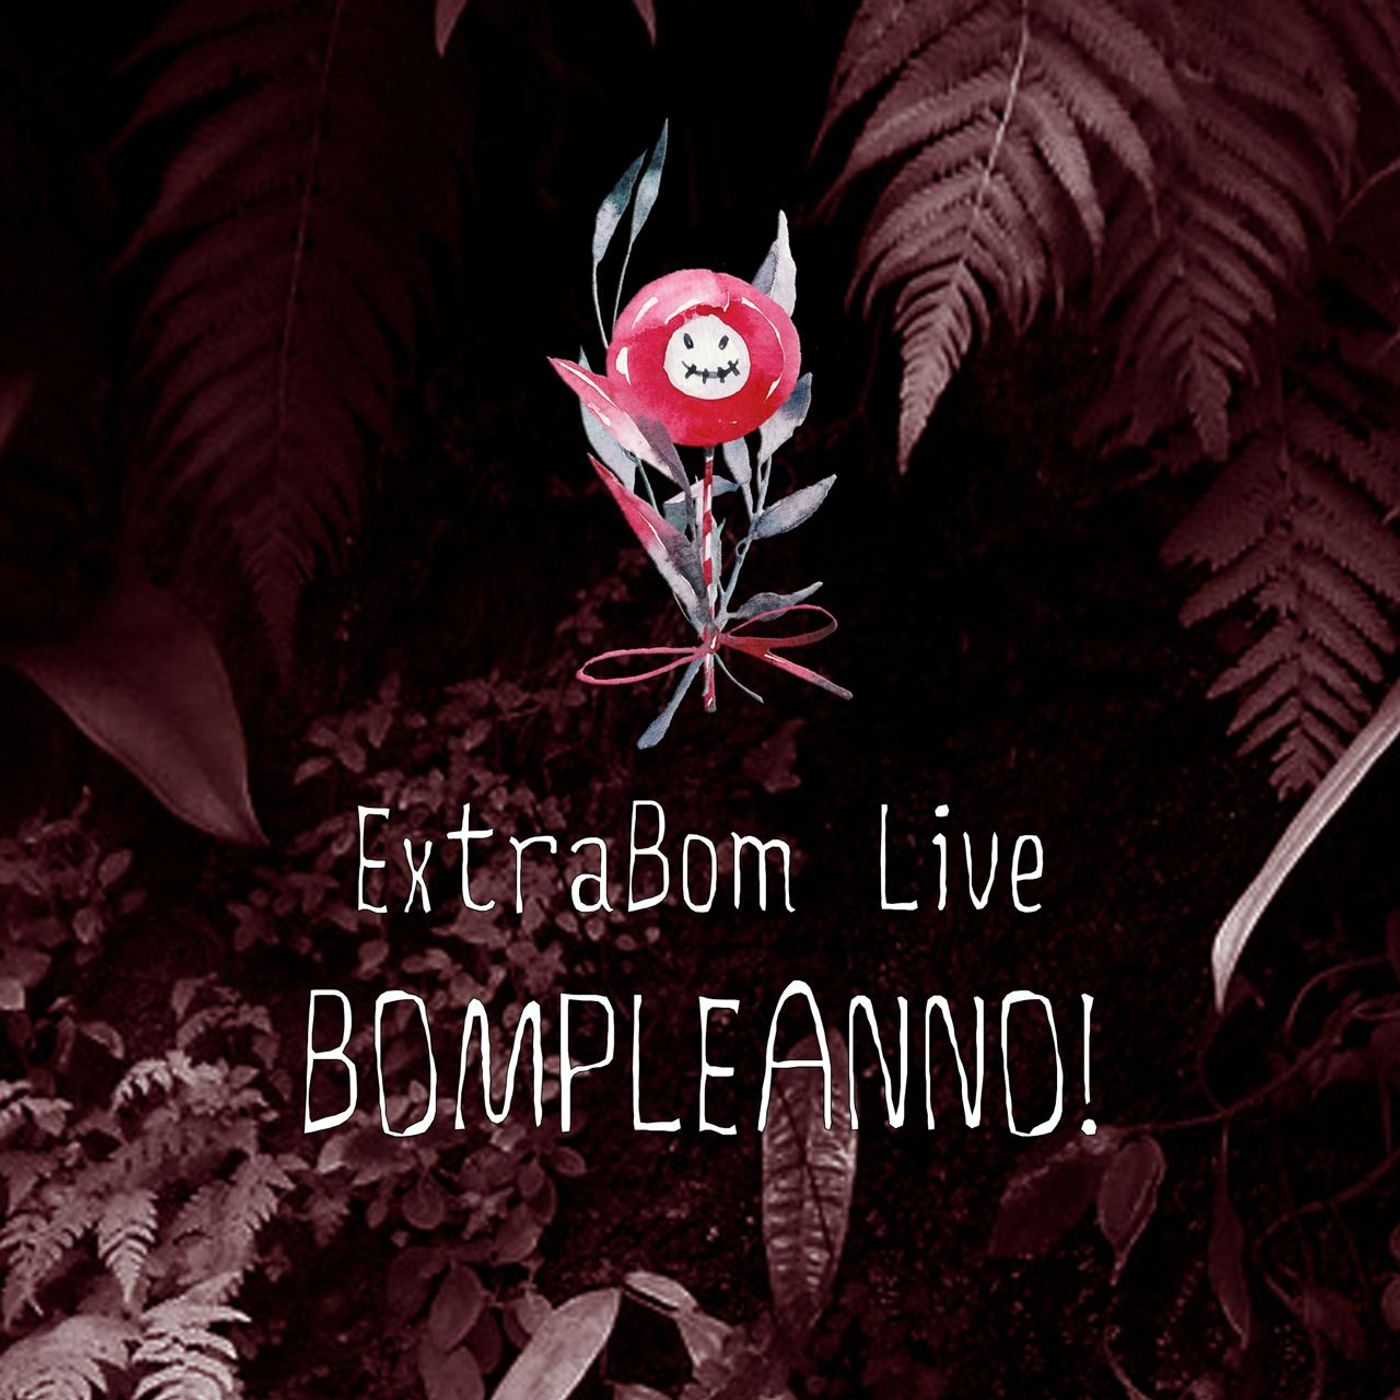 ExtraBoM Live 13/05/2021 - BoMpleanno!